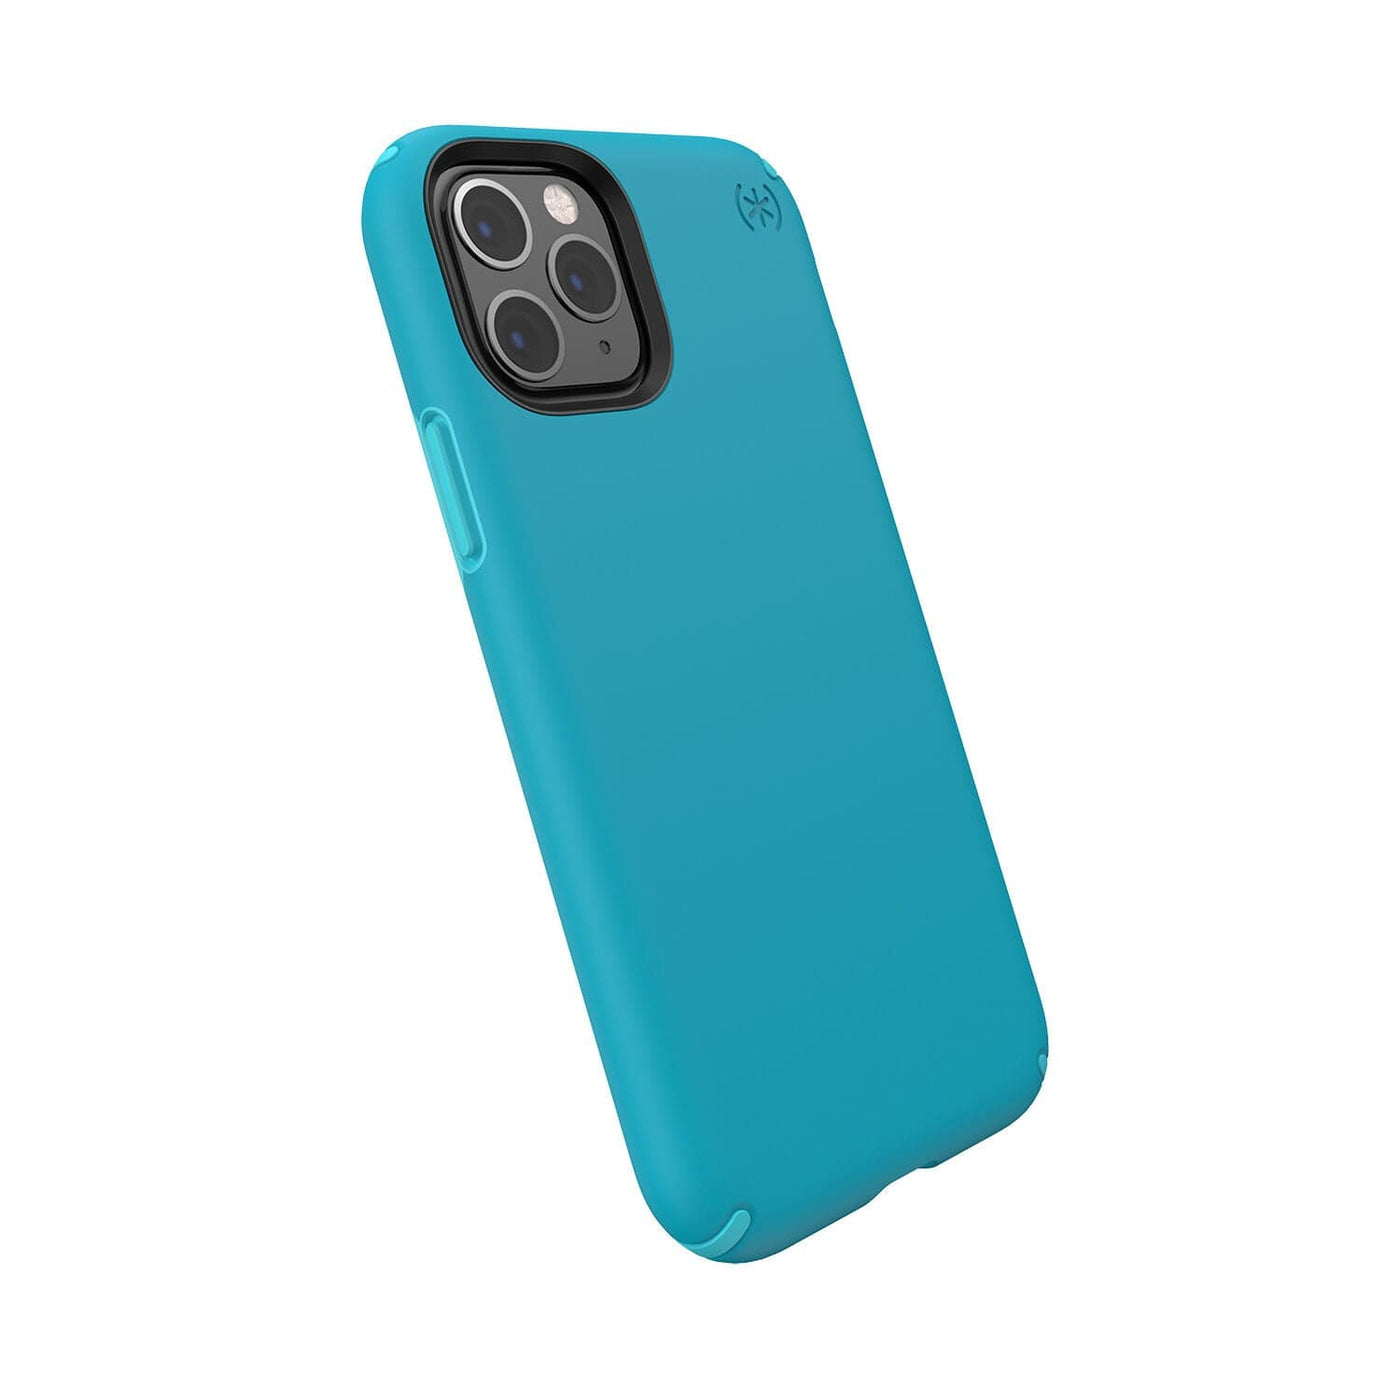 Speck Presidio Stay Clear iPhone 11 Pro Cases Best iPhone 11 Pro - $39.99